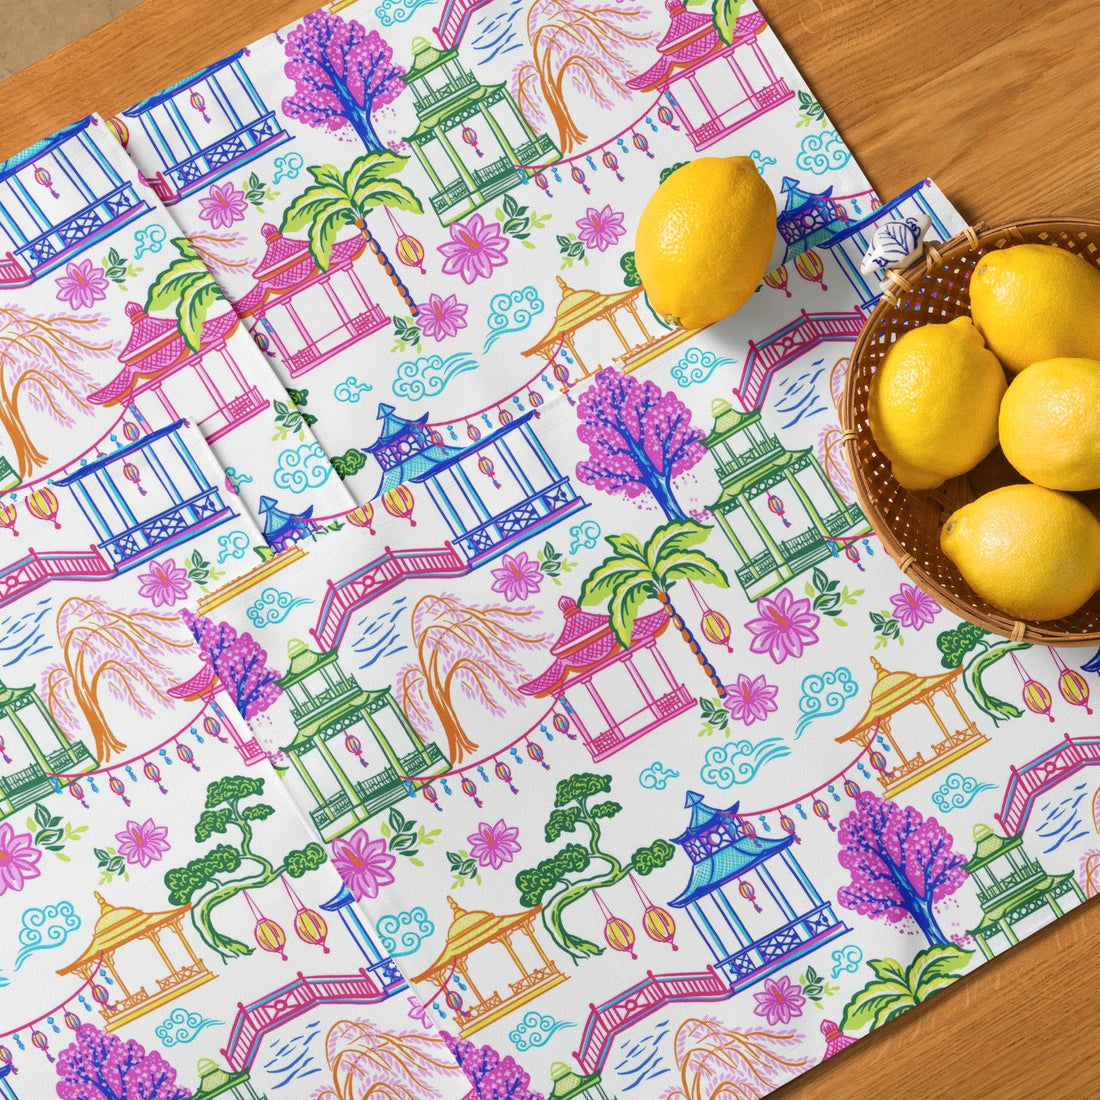 Kate McEnroe New York Set of 4 Tropical Chinoiserie Pagoda Garden Placemats in Blue, Pink, Green, Yellow by Kate McEnroe - KM13859924Placemats8908815_17484